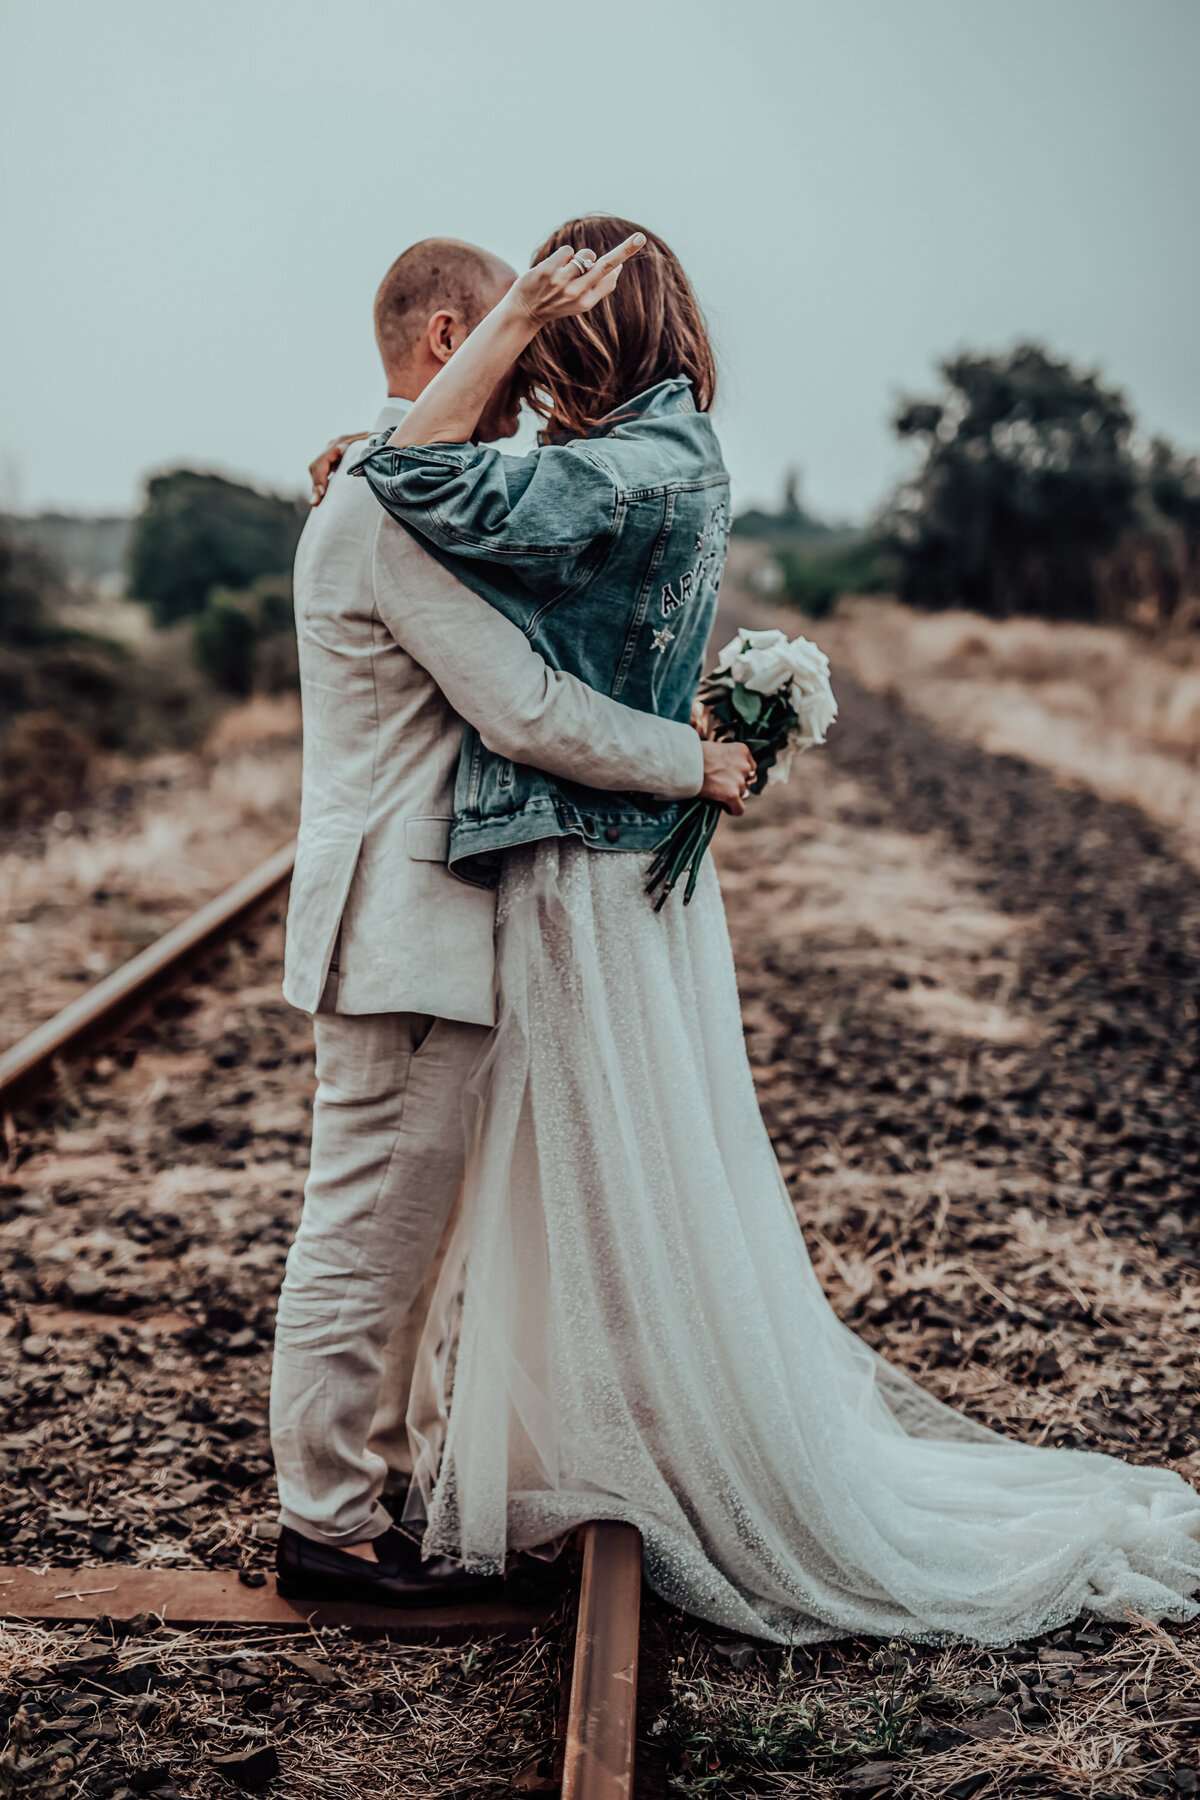 Wedded couple posing on railway track with blurred background